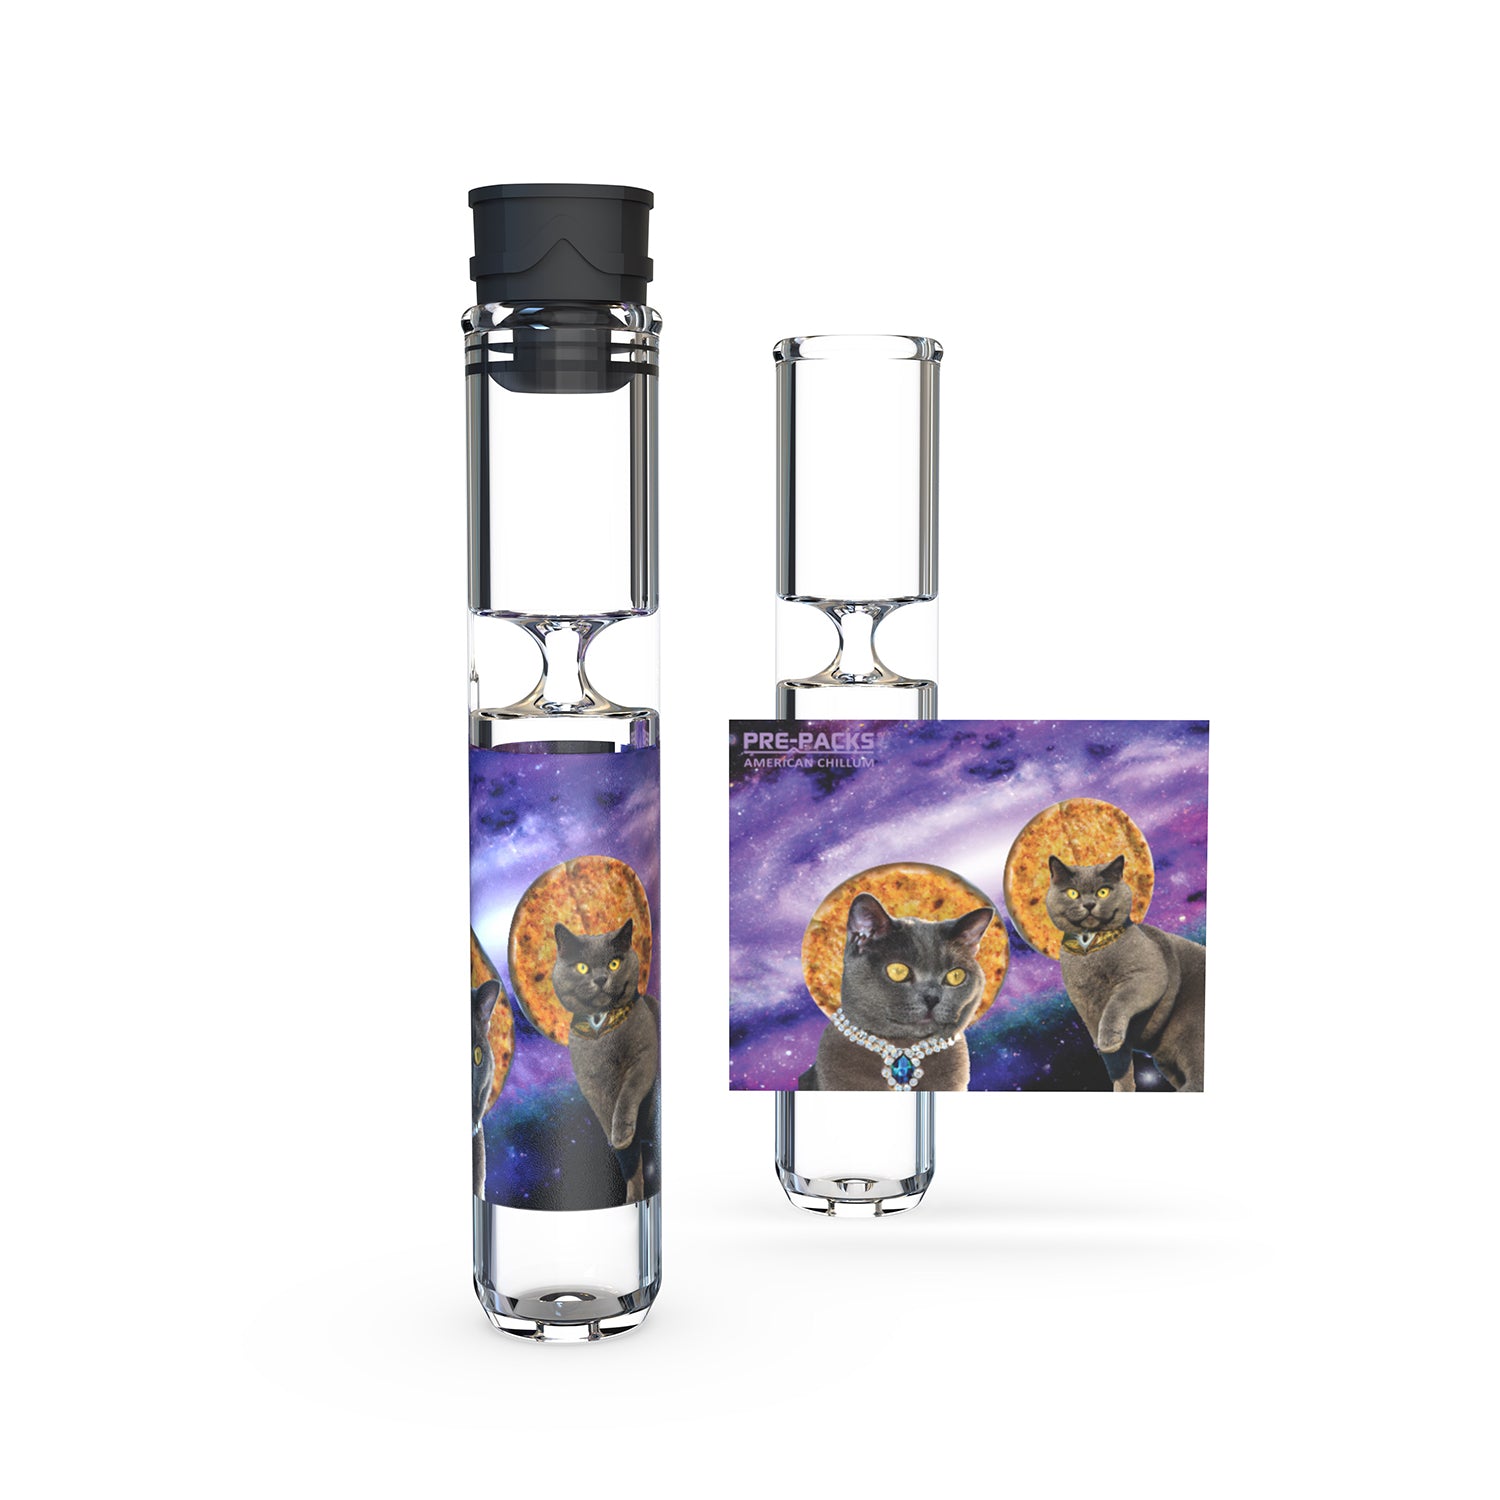 One hitter with cap for cat lovers.